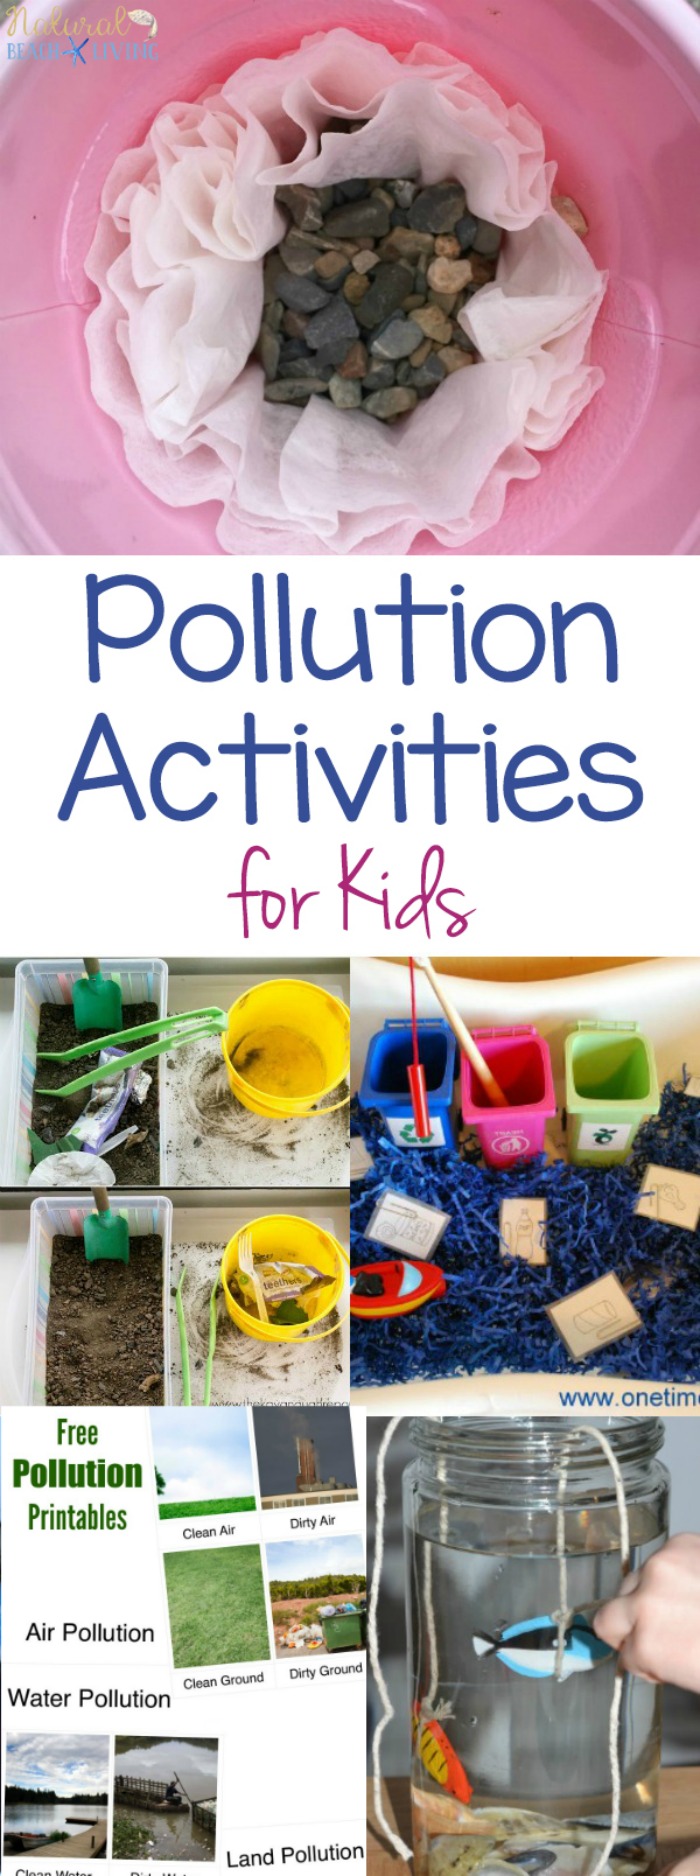 15+ Pollution Activities for Kids – Earth Day Science Activities